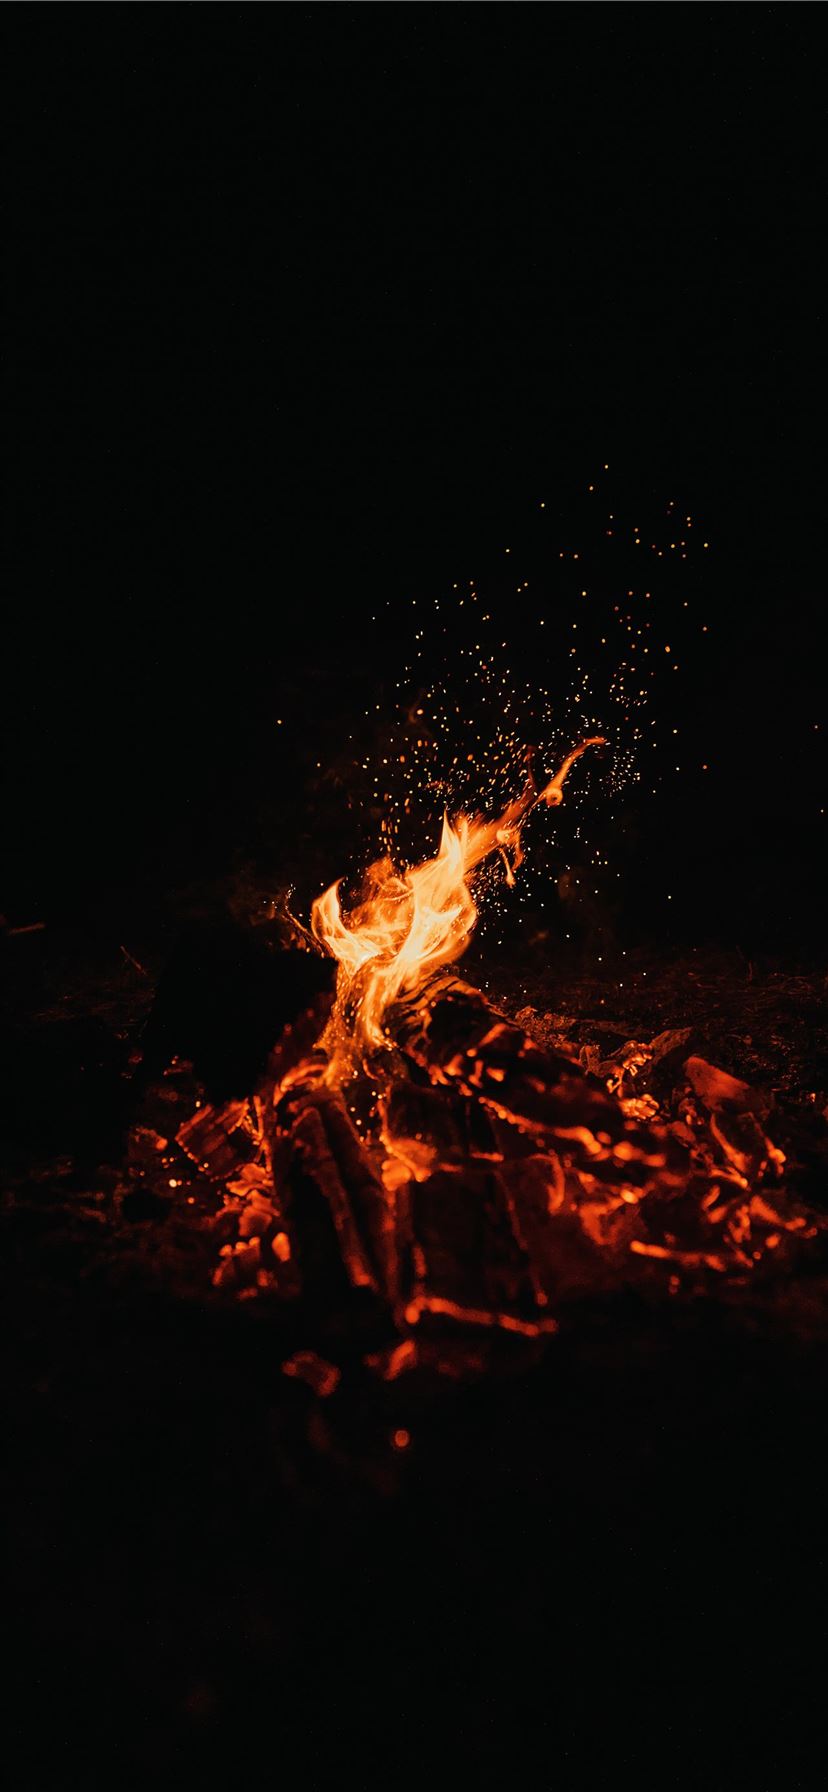 A fire burning in the night - Fire